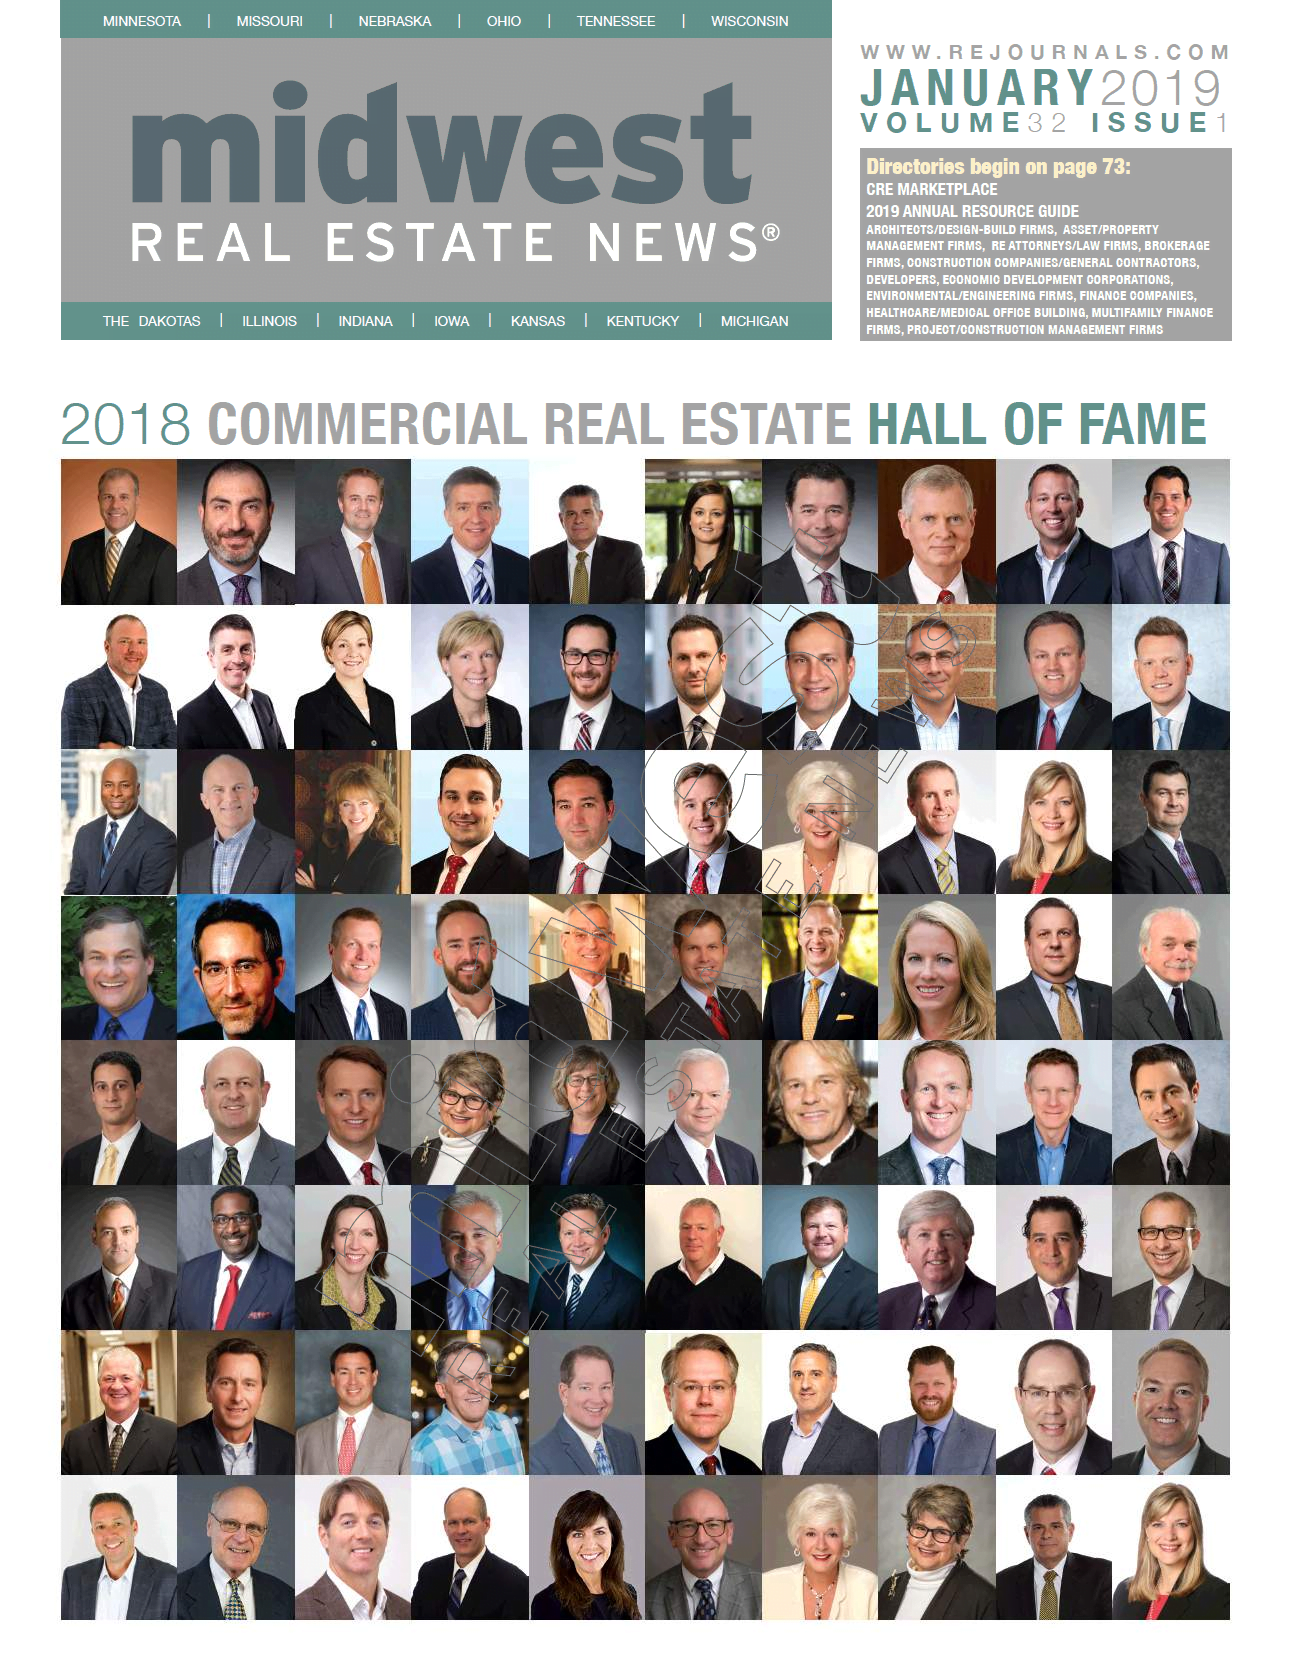 Midwest Real Estate News 2018 Hall of Fame